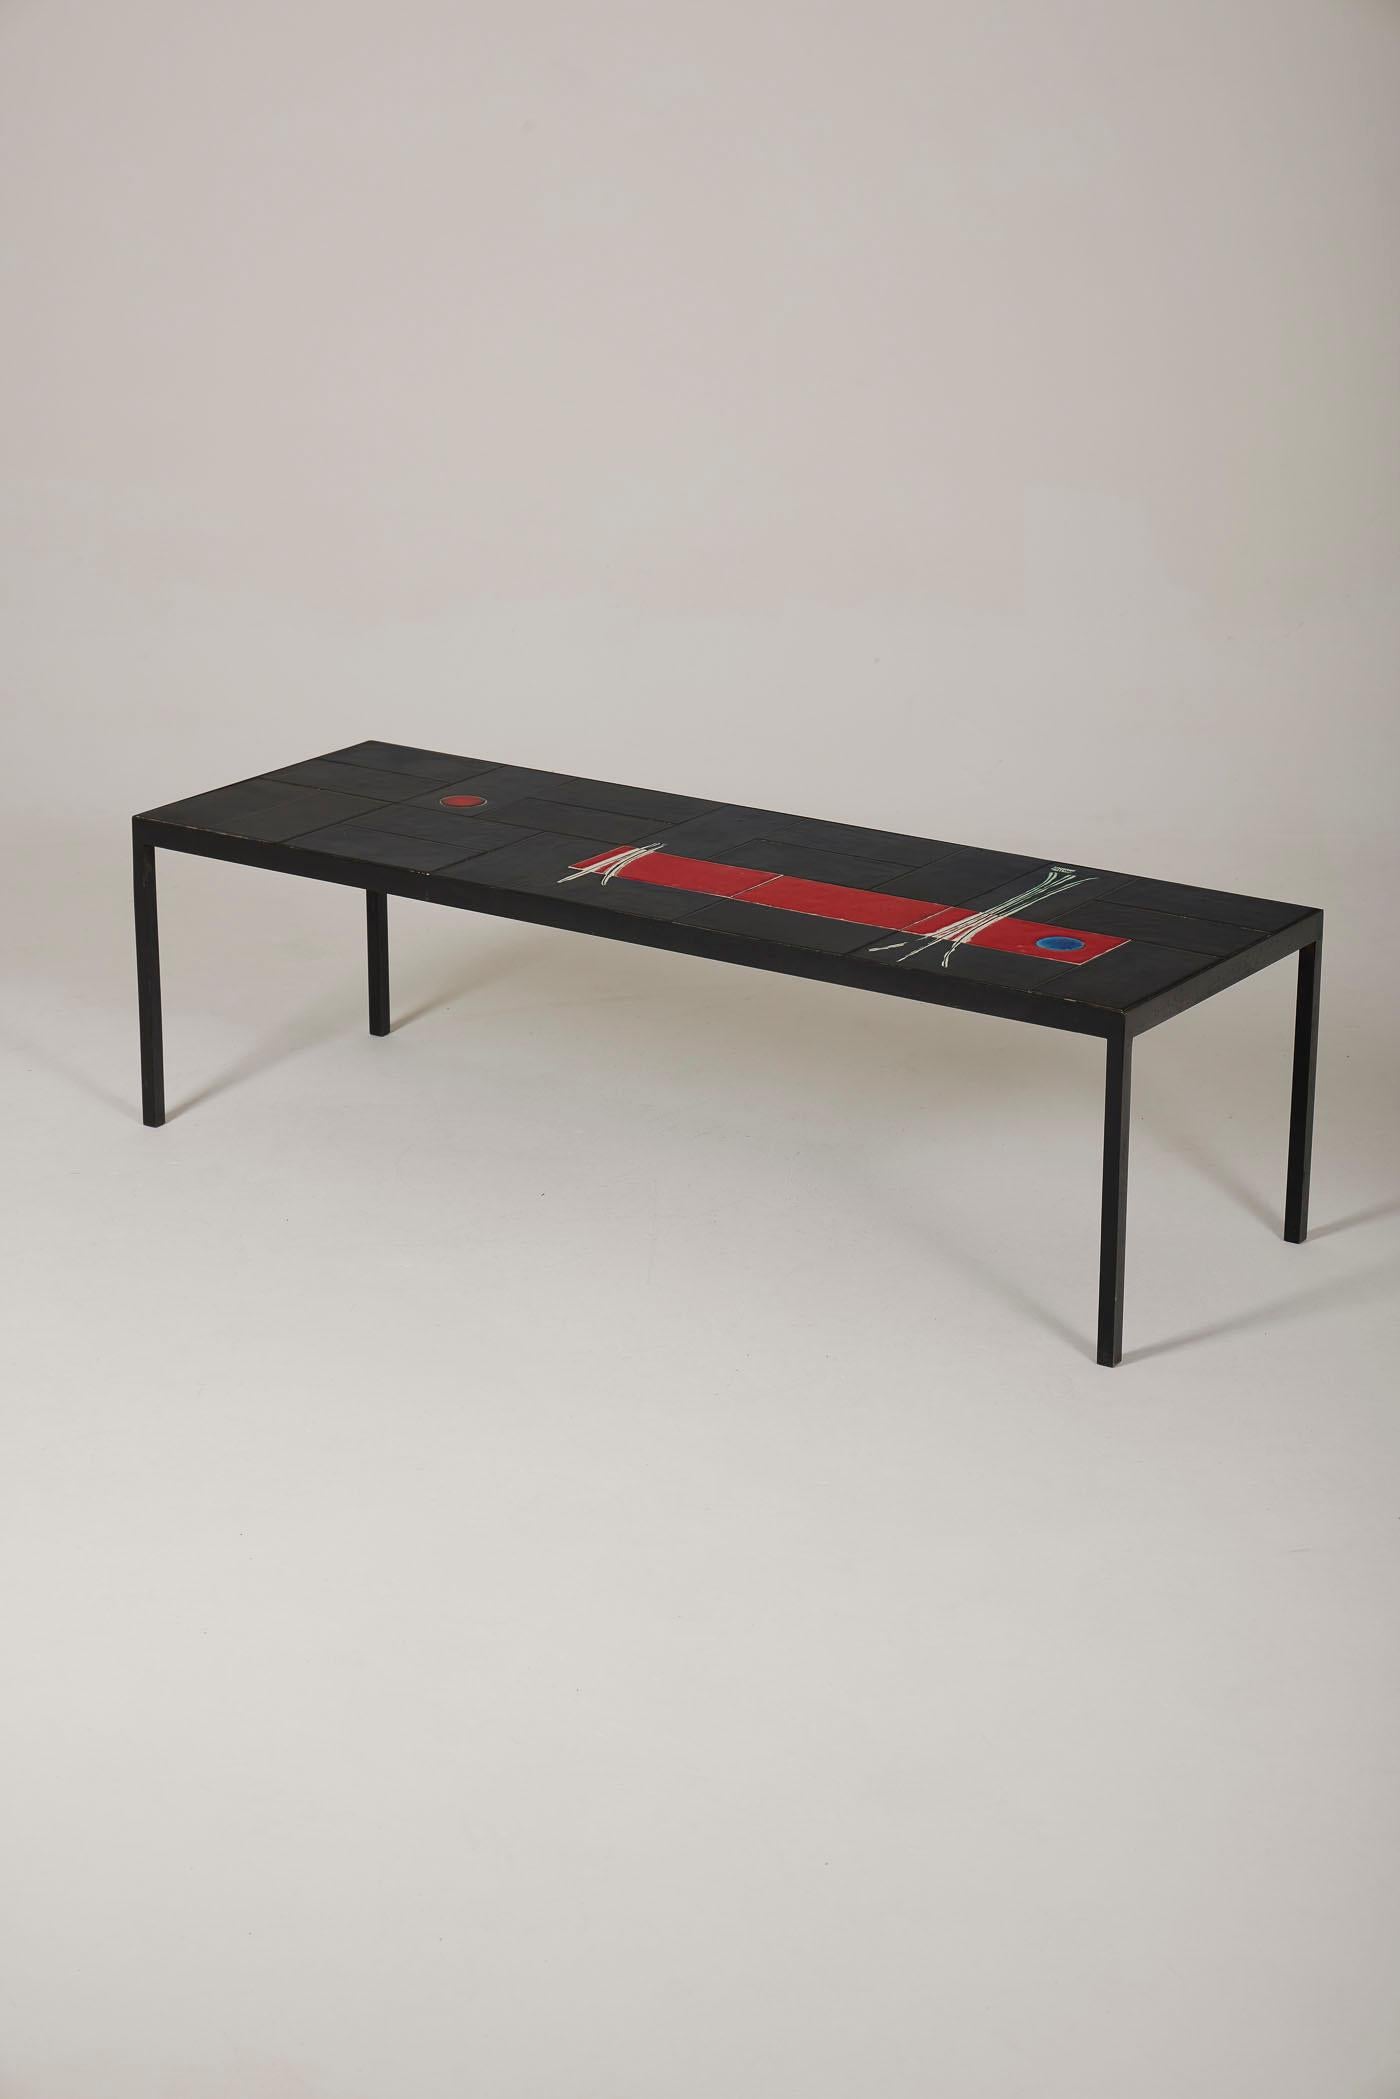 Low ceramic table from Belgium dating back to the 1960s. The base is made of black lacquered metal. The tabletop is adorned with glazed ceramic featuring an abstract design on a black background. Signed Moises. In perfect condition.
DV437